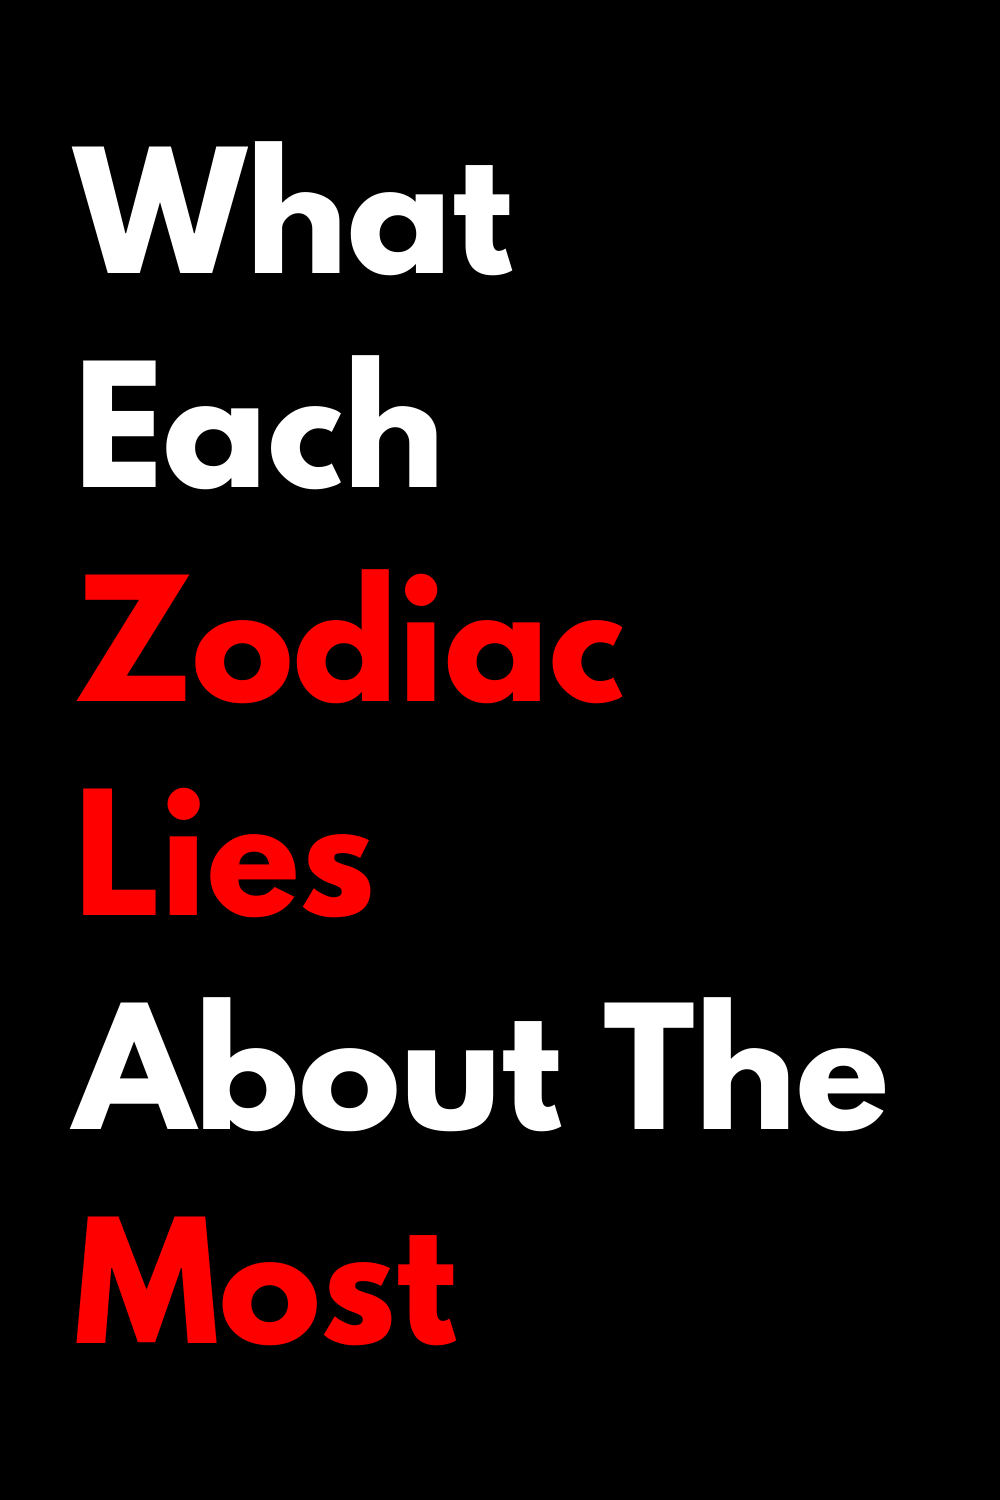 What Each Zodiac Lies About The Most